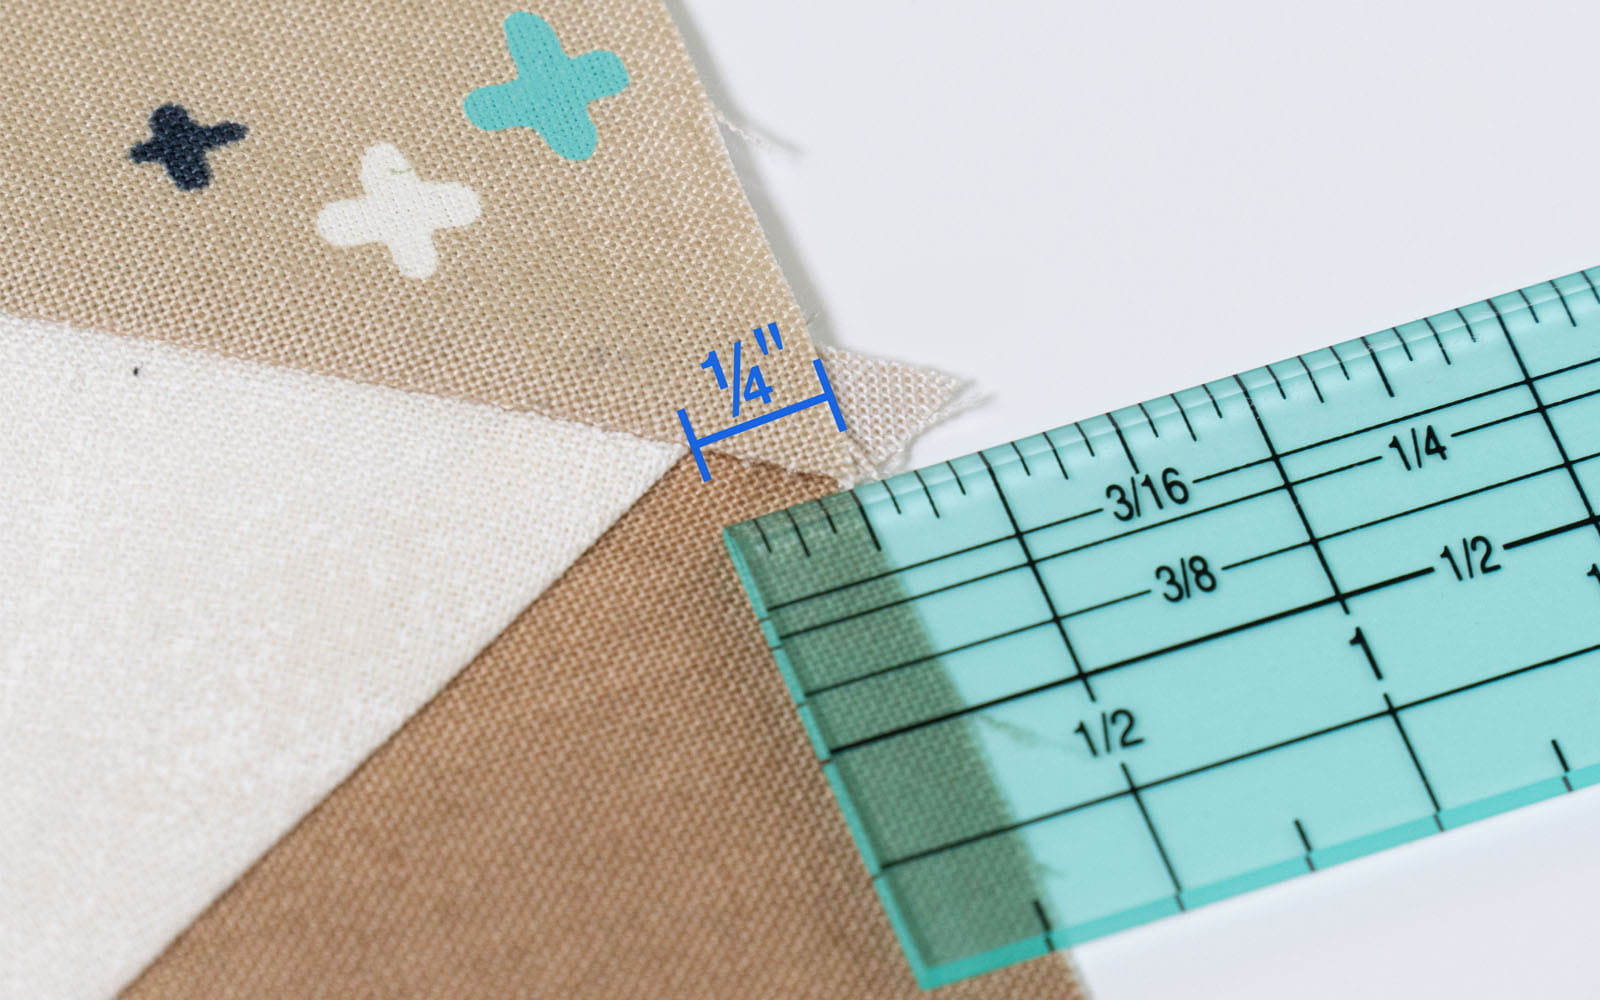 Fabric measured with ruler